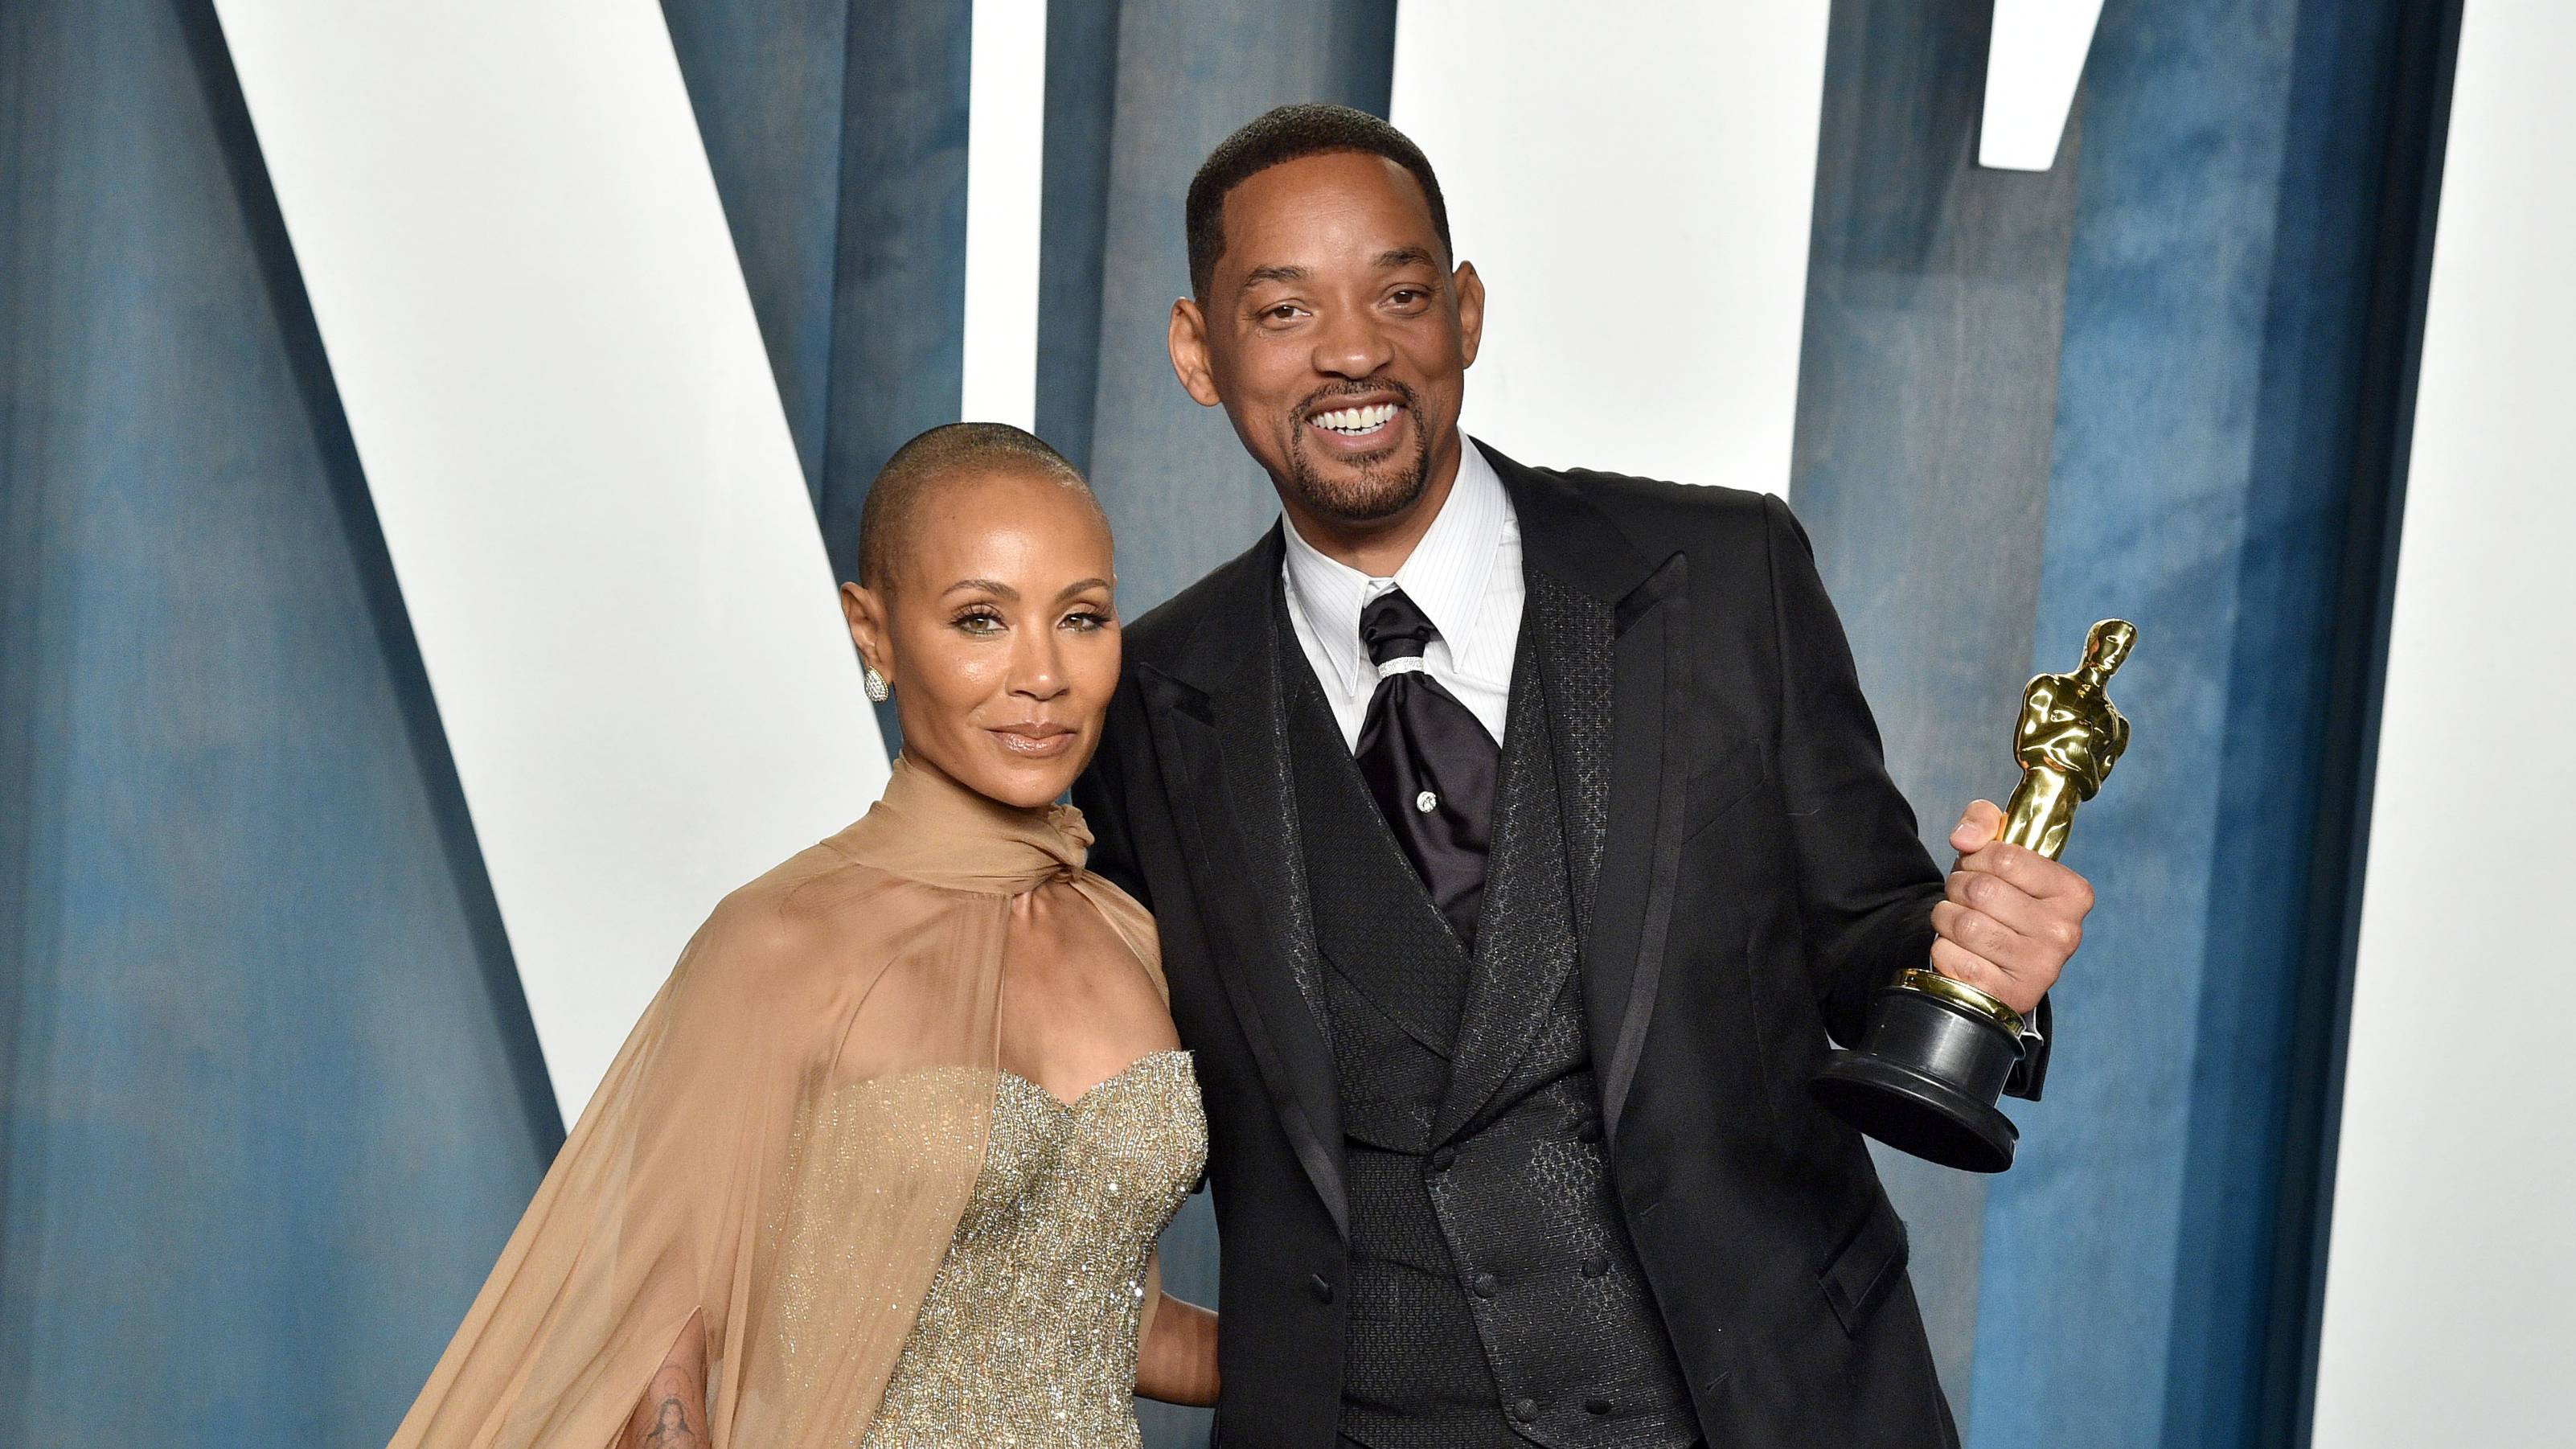 Jada Pinkett Smith Reveals She Has Been Separated From Will for Years